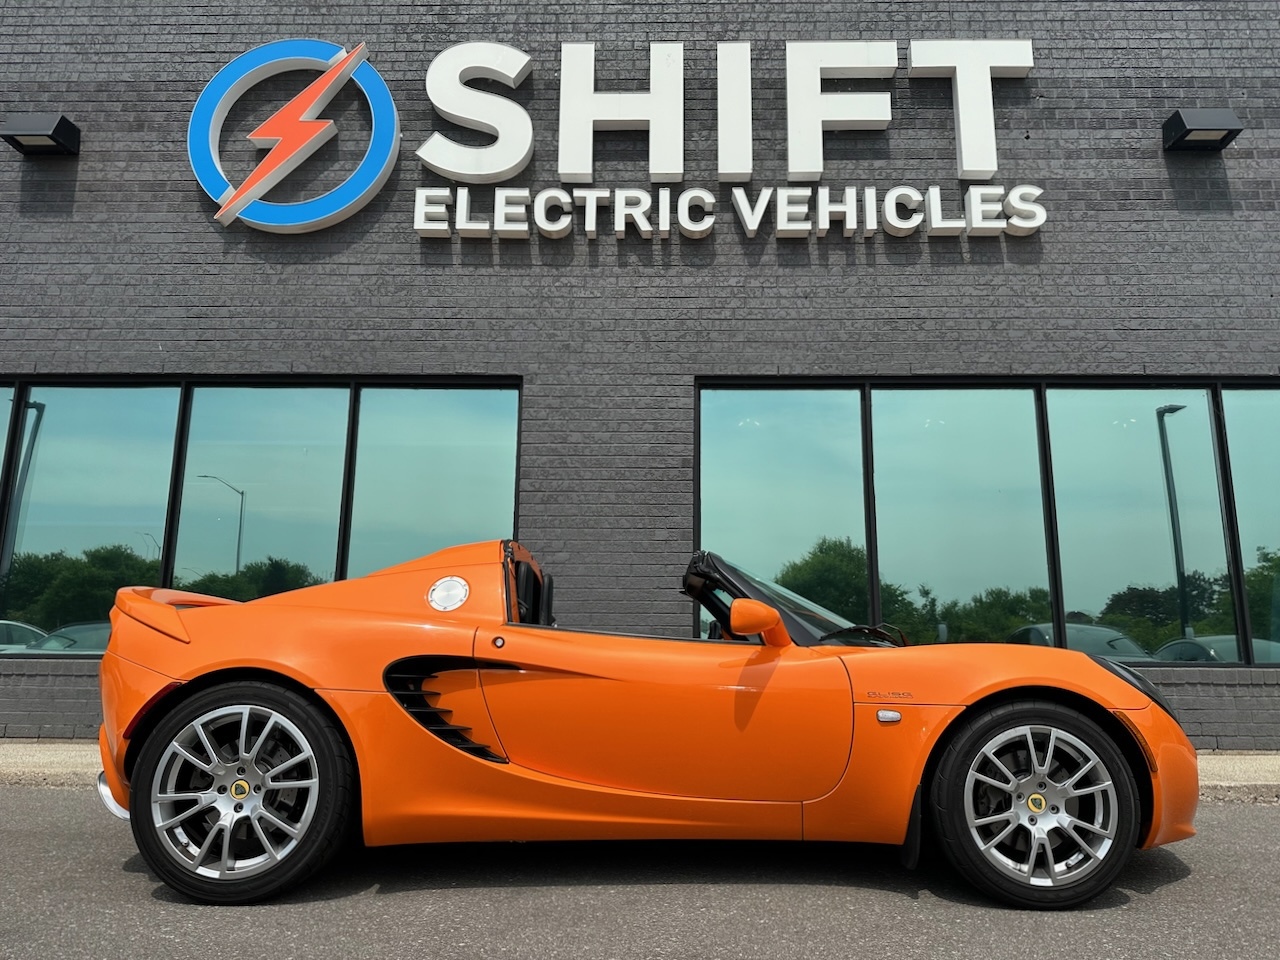 2009 Lotus Elise Convertible SC Spectacular condition inside and ou